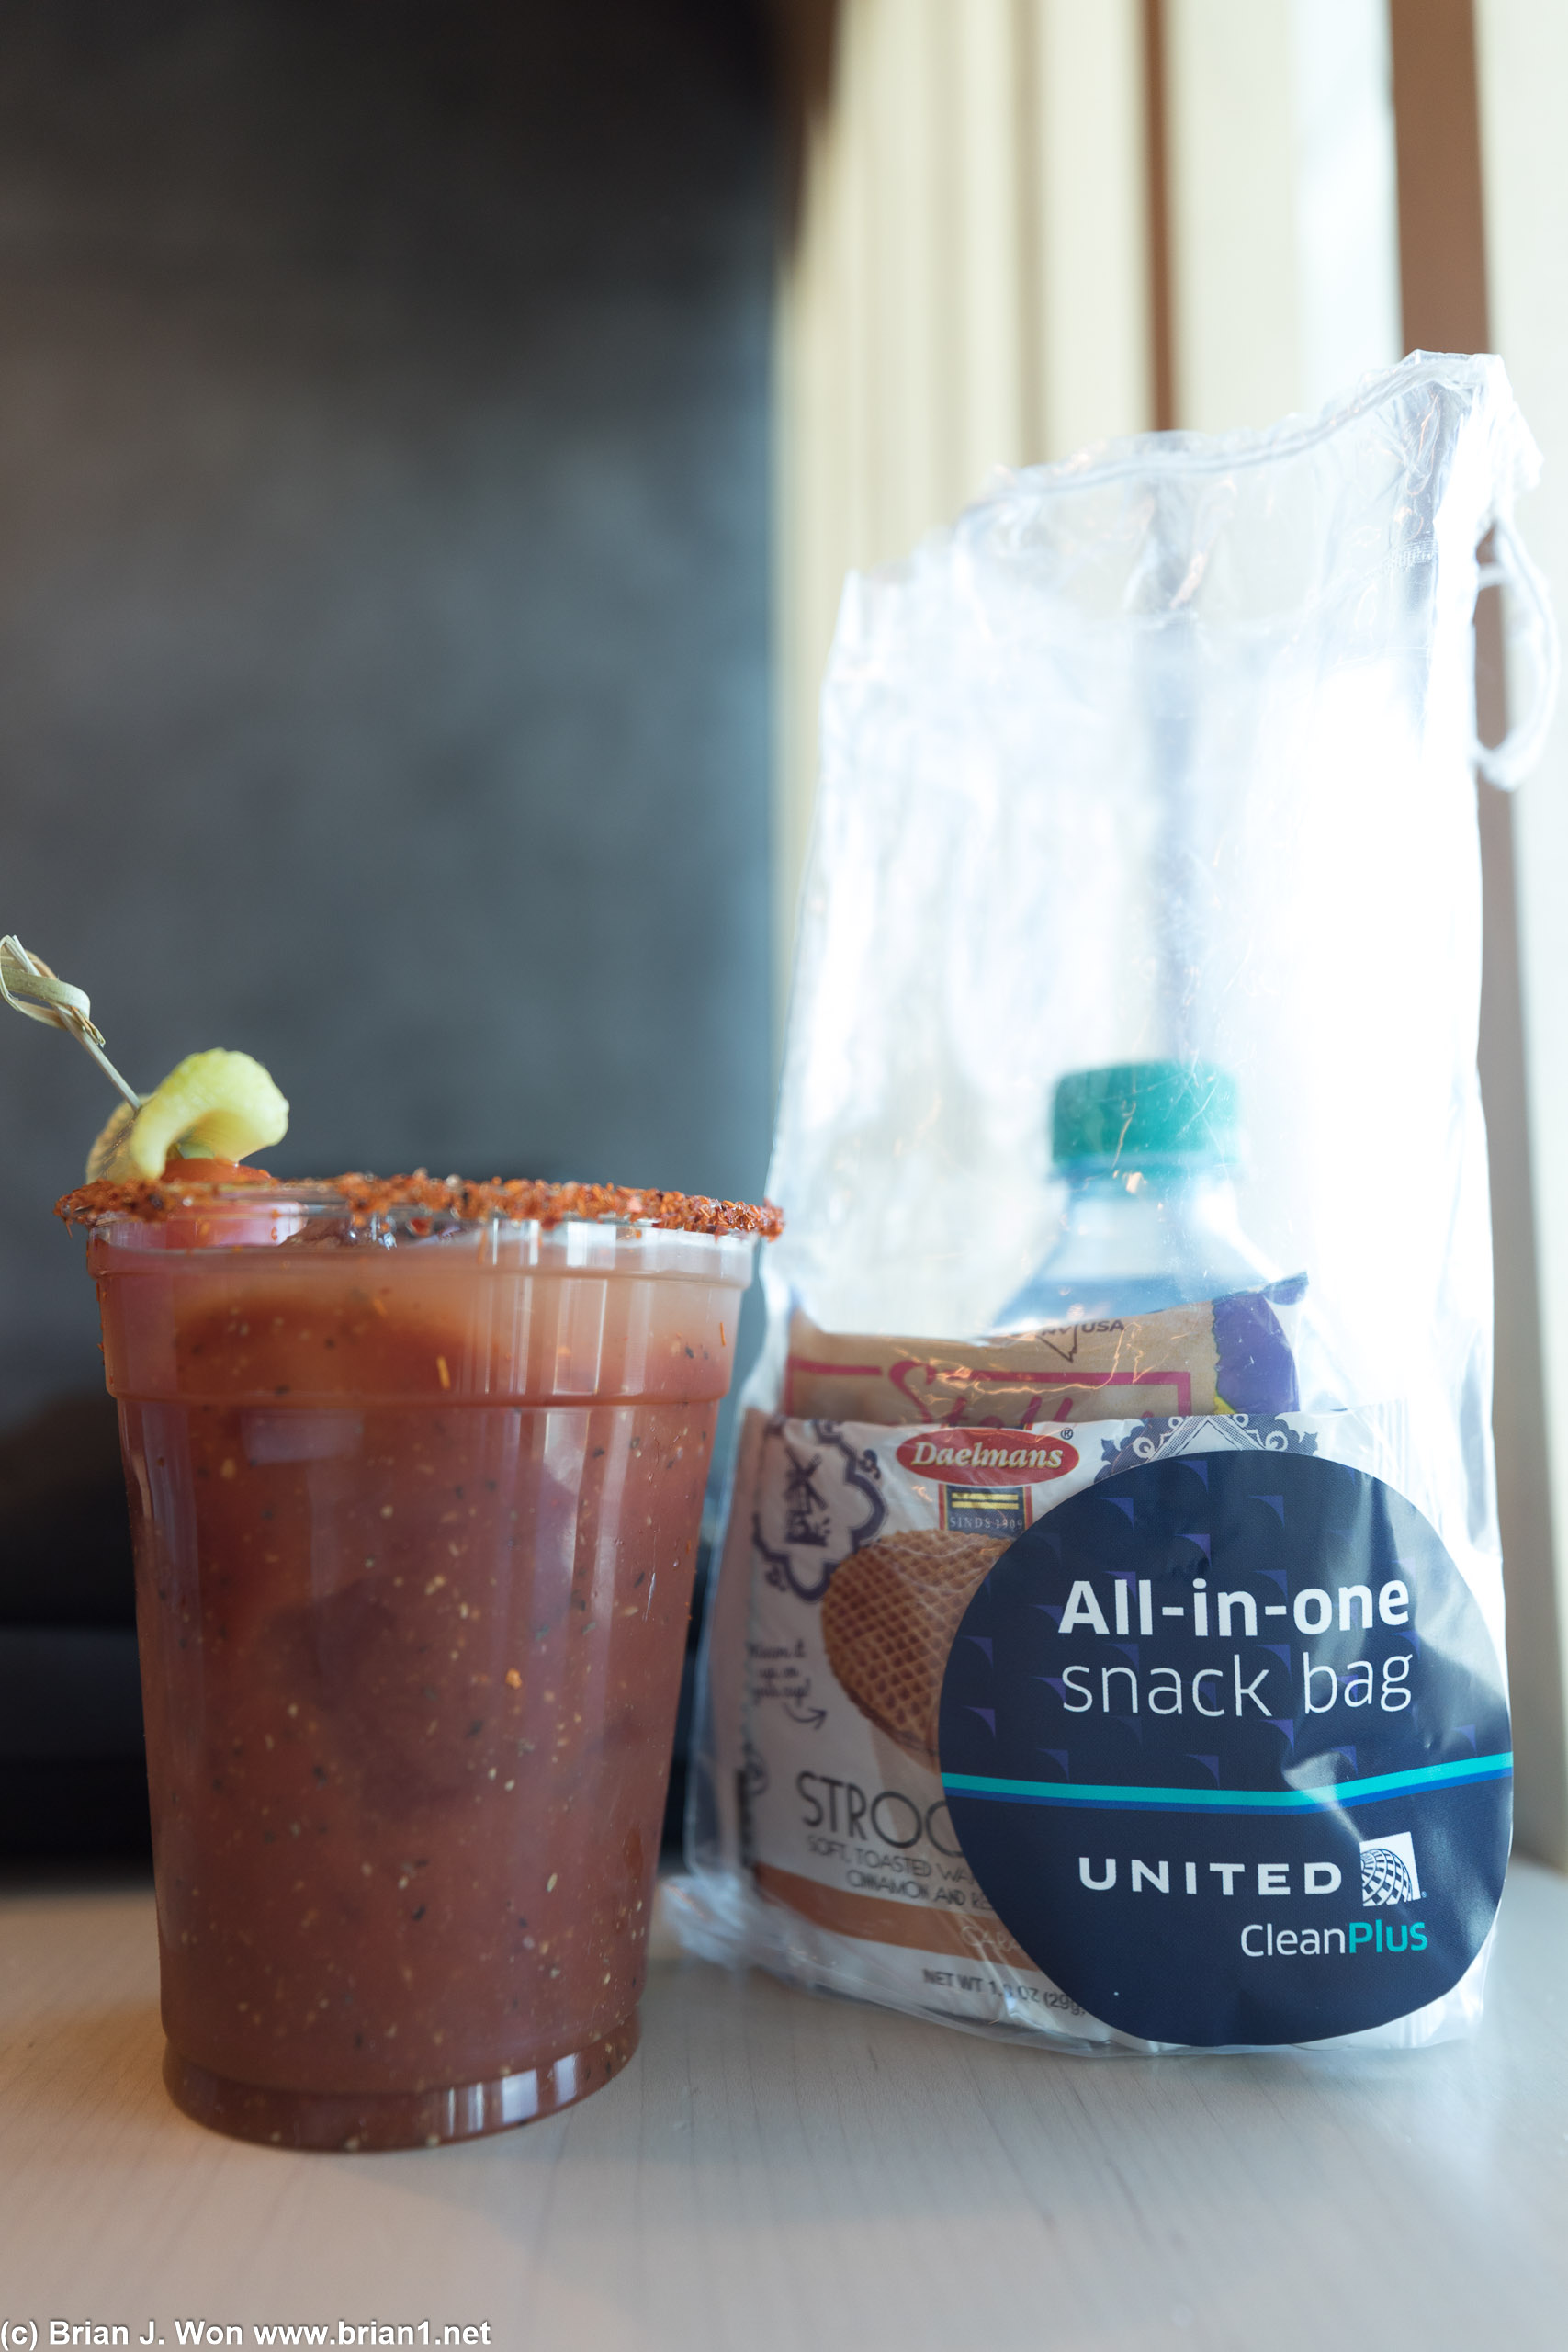 Bloody mary on left, United first class snack bag at right.